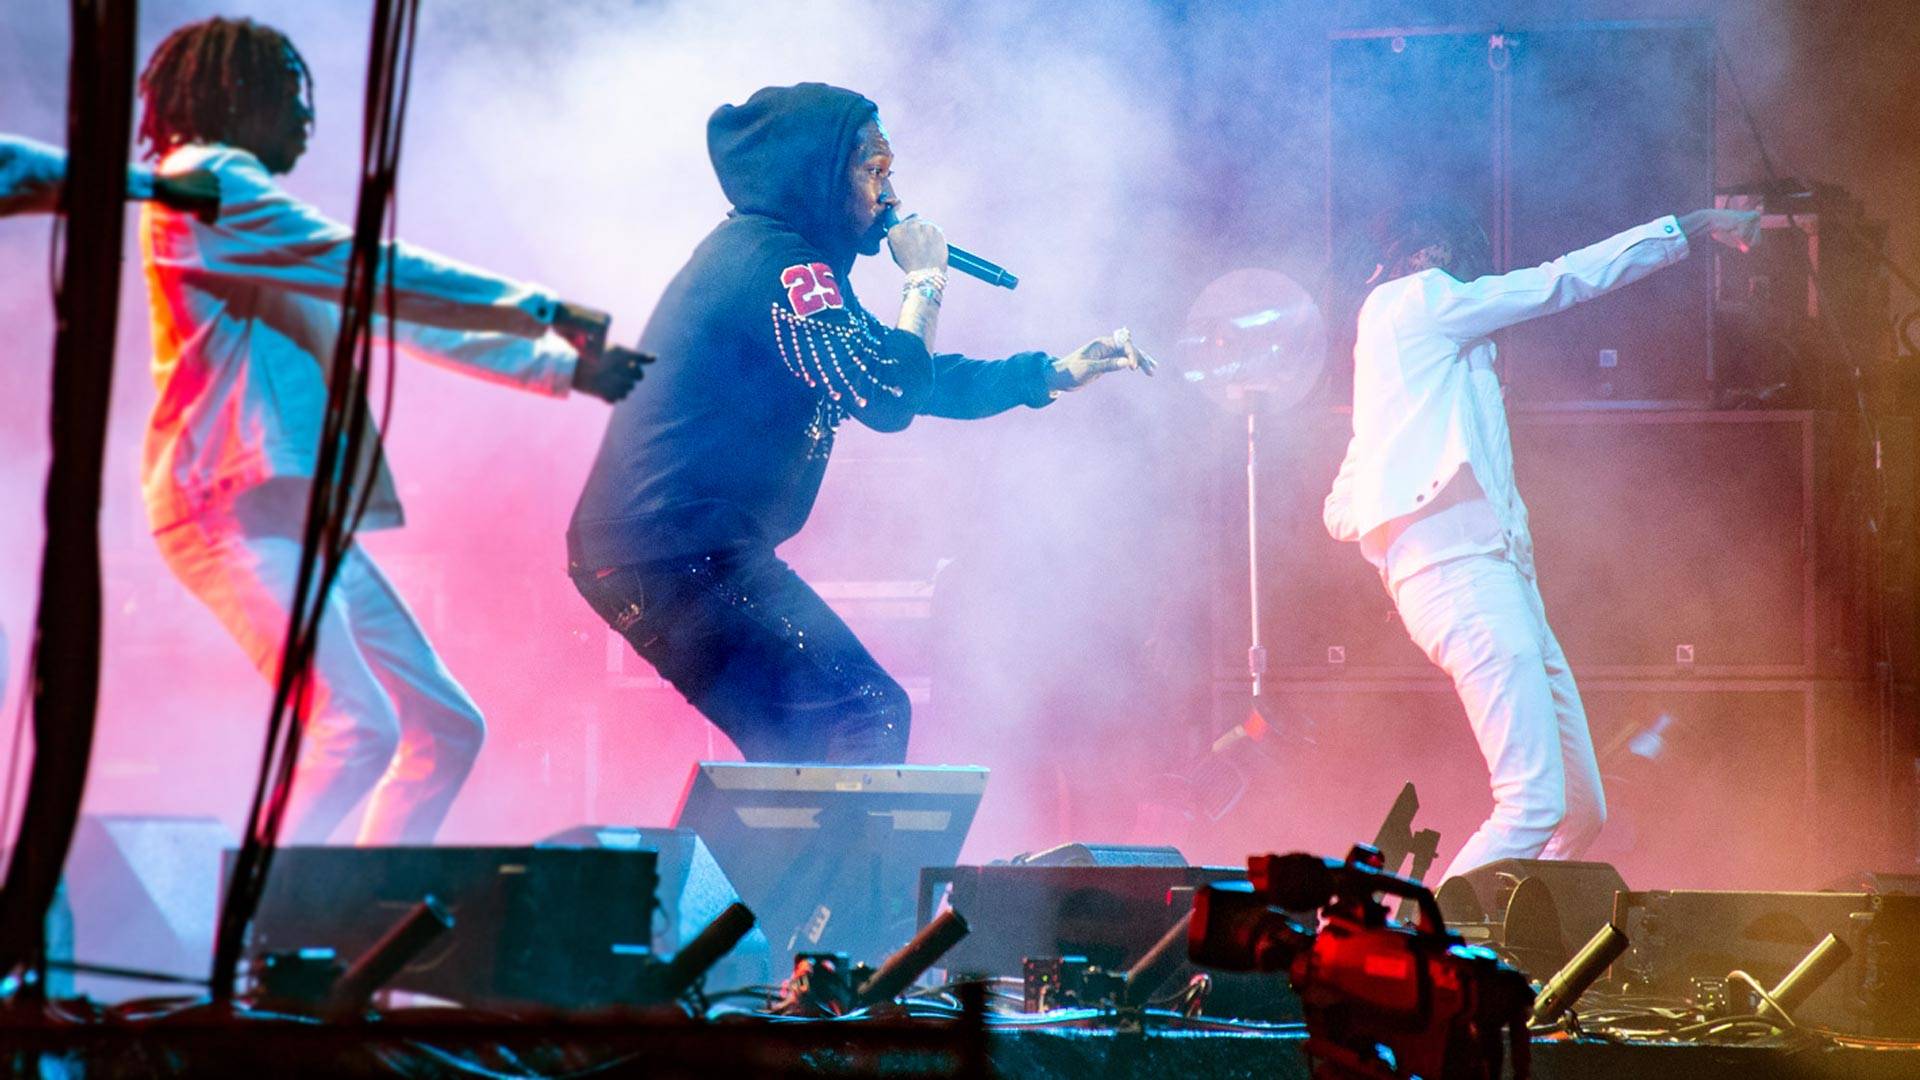 Future performs at Outside Lands music festival in San Francisco, Aug. 11, 2018. Estefany Gonzalez